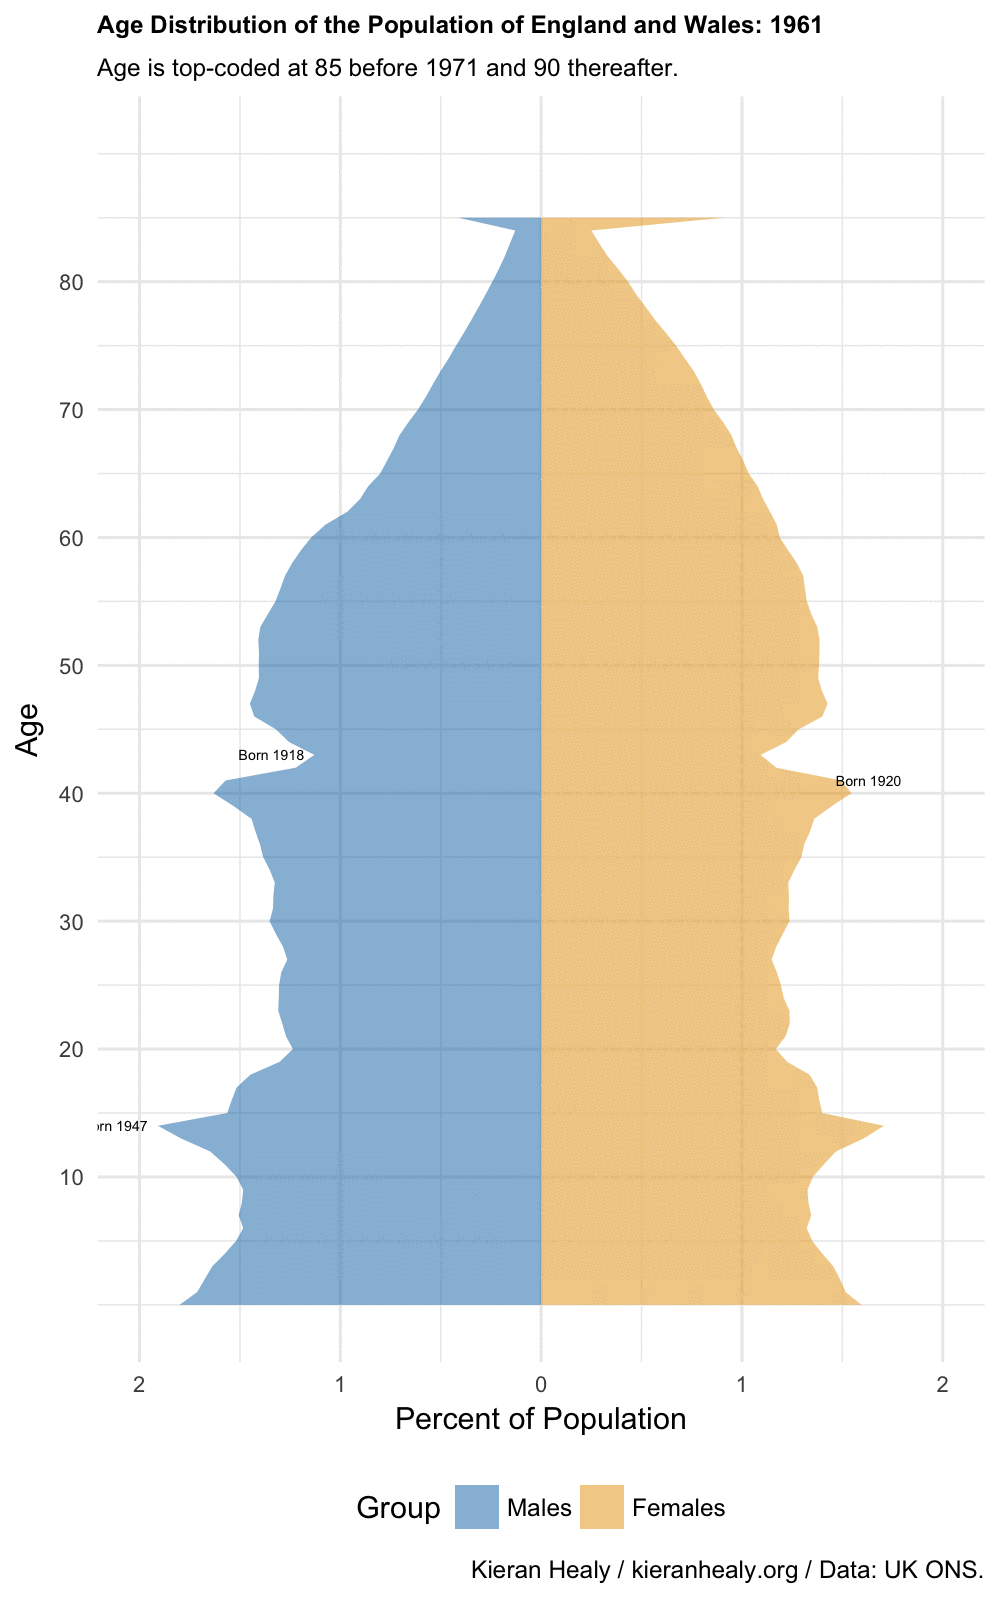 Animated Population Pyramids in R 